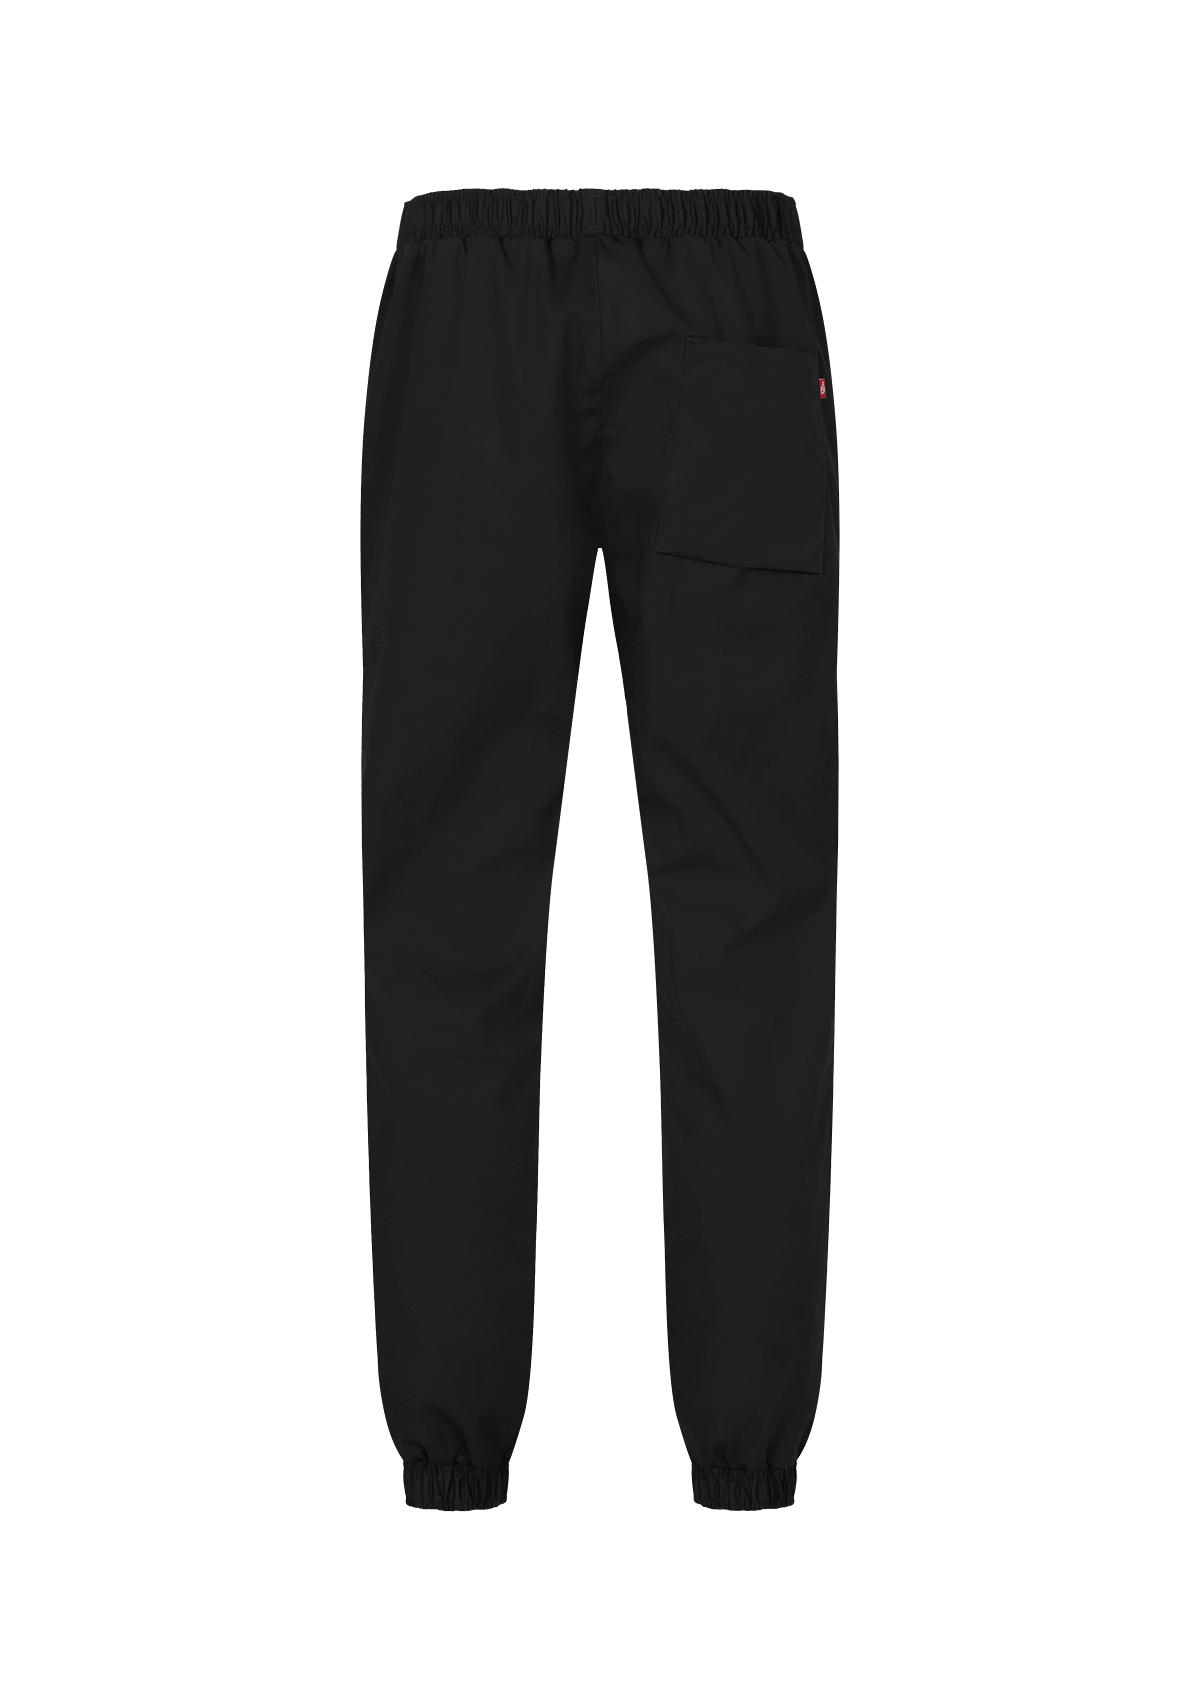 Pants in a Unisex Relaxed Fit